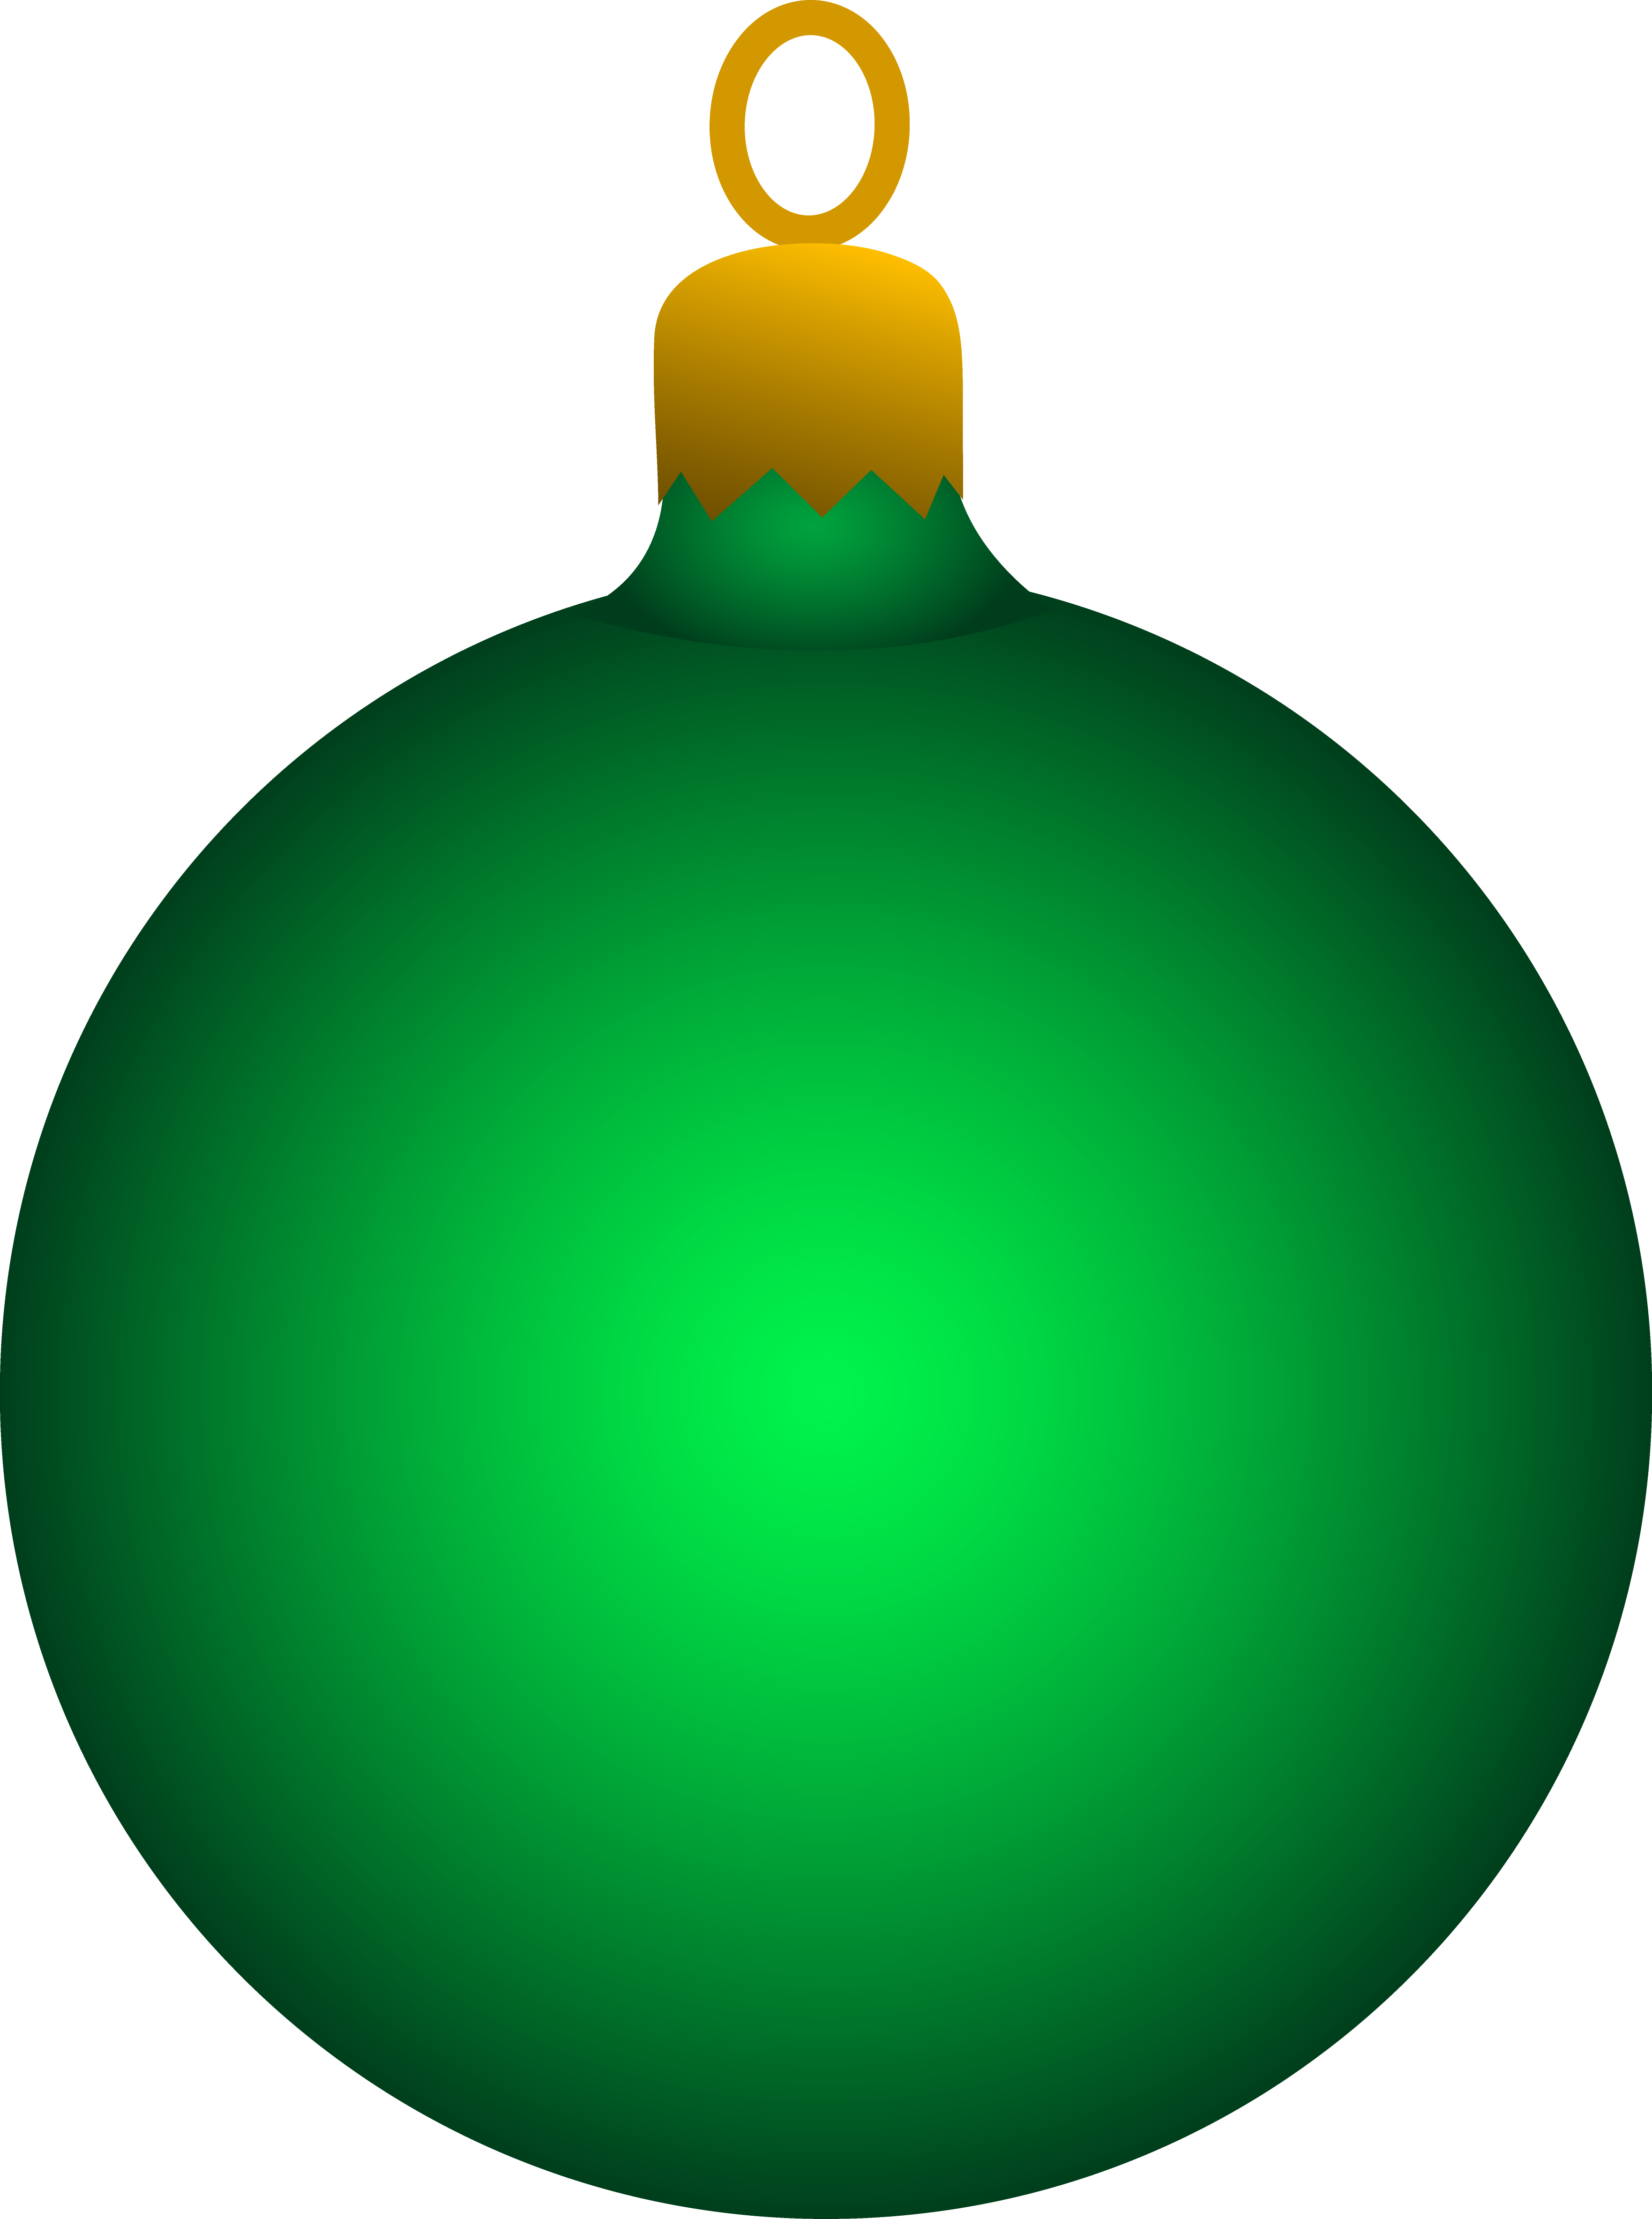 Christmas Ornaments Clipart | Clipart library - Free Clipart Images